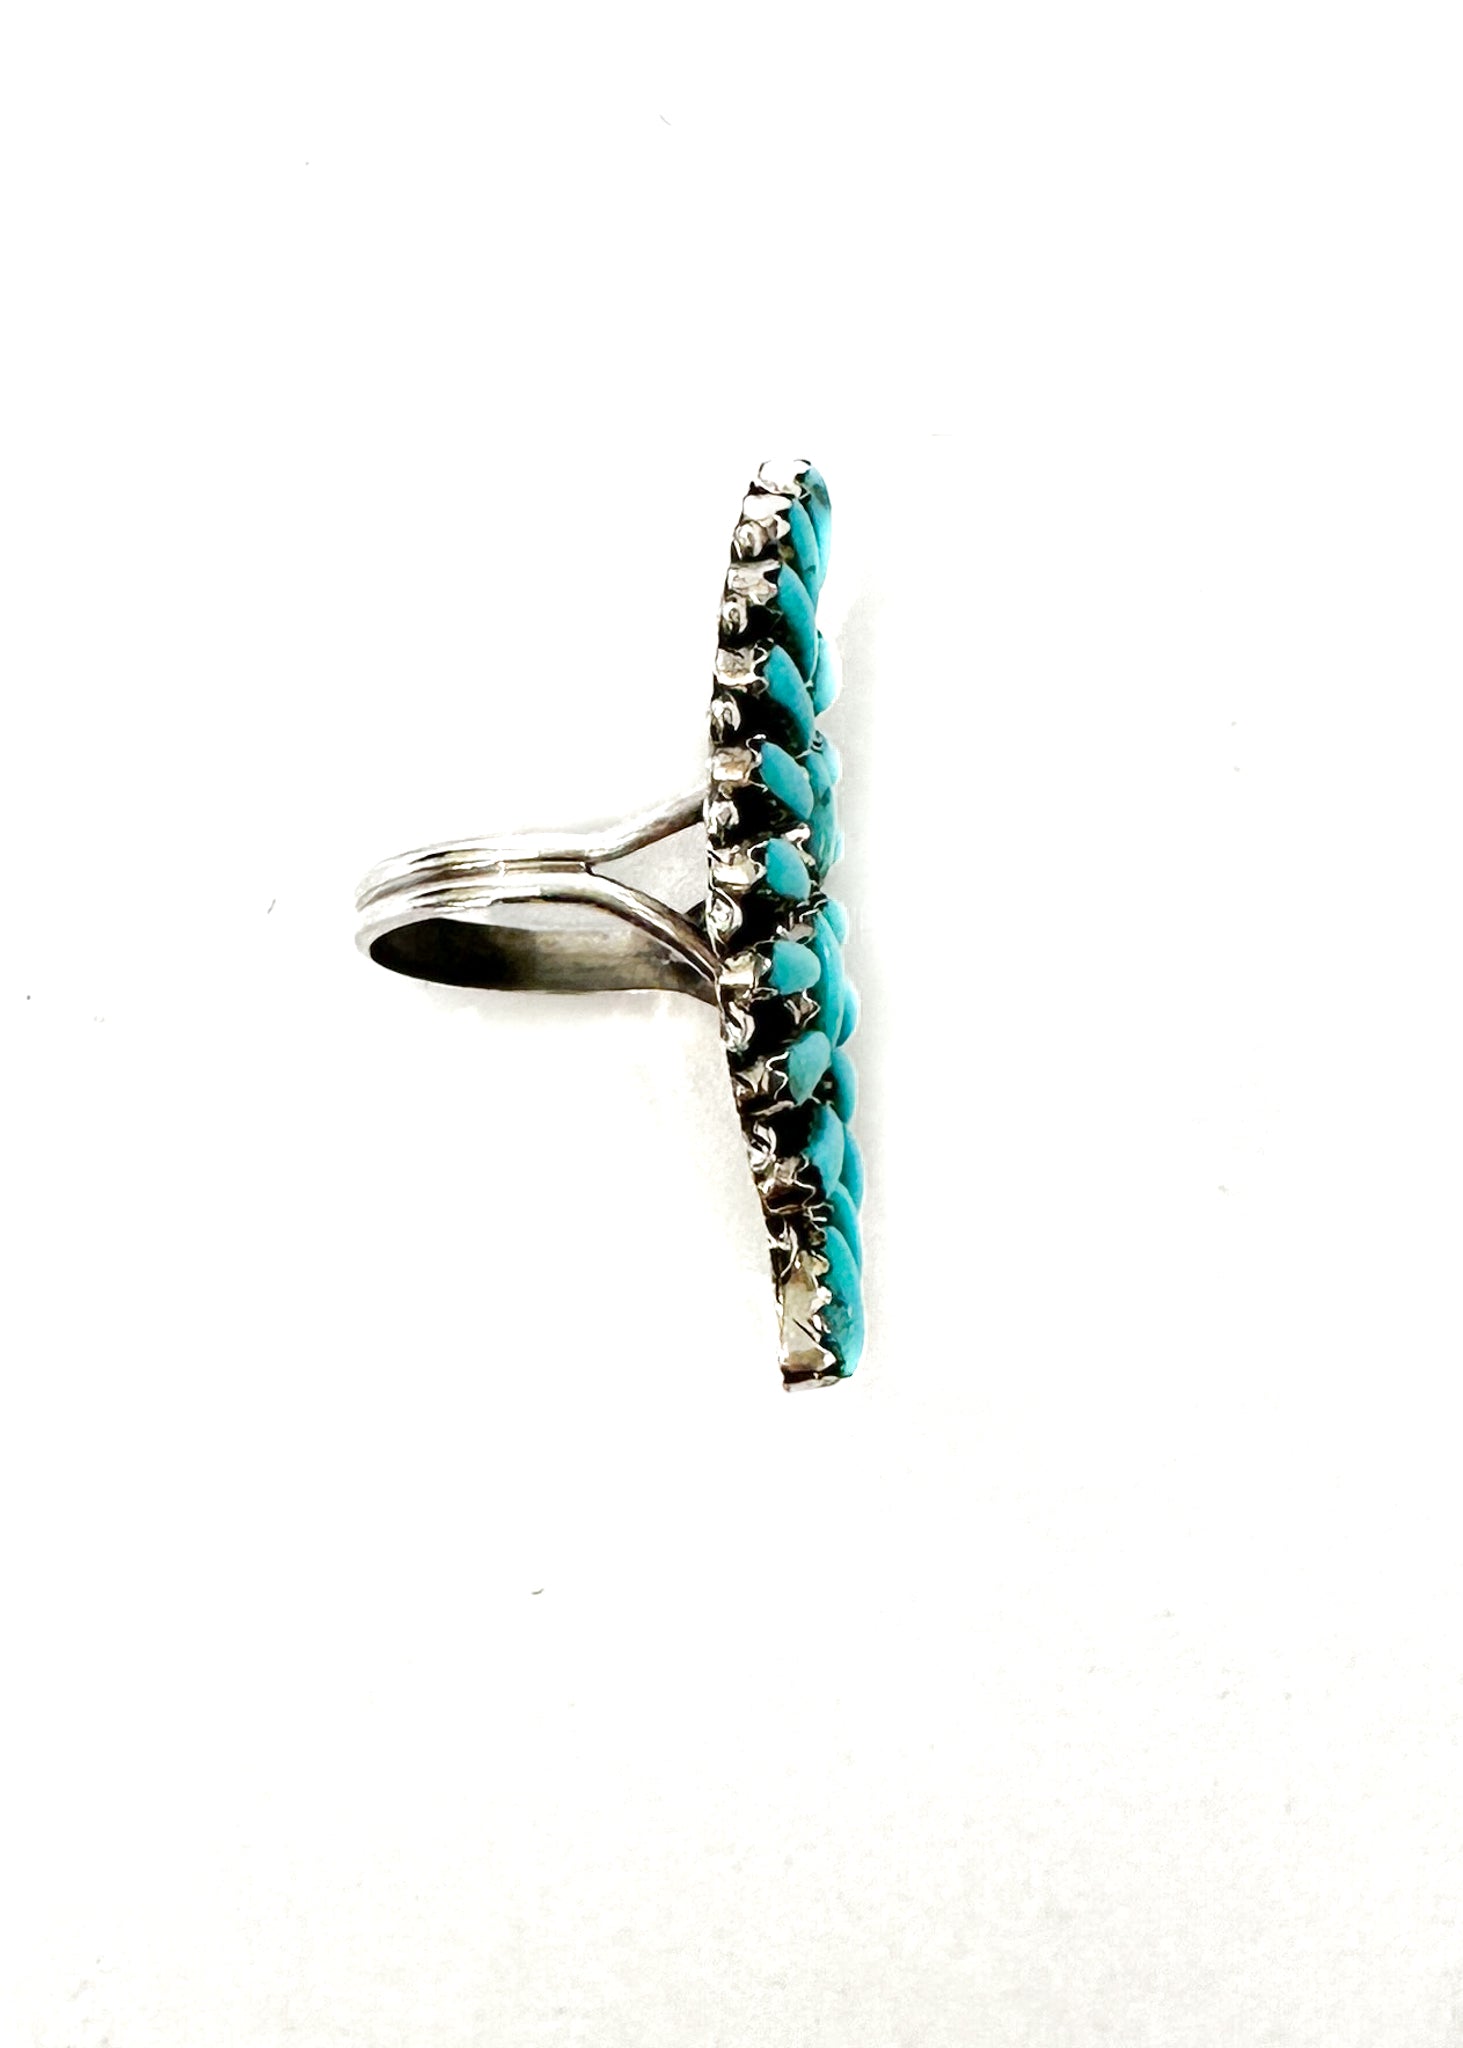 Raton Cluster Turquoise Ring